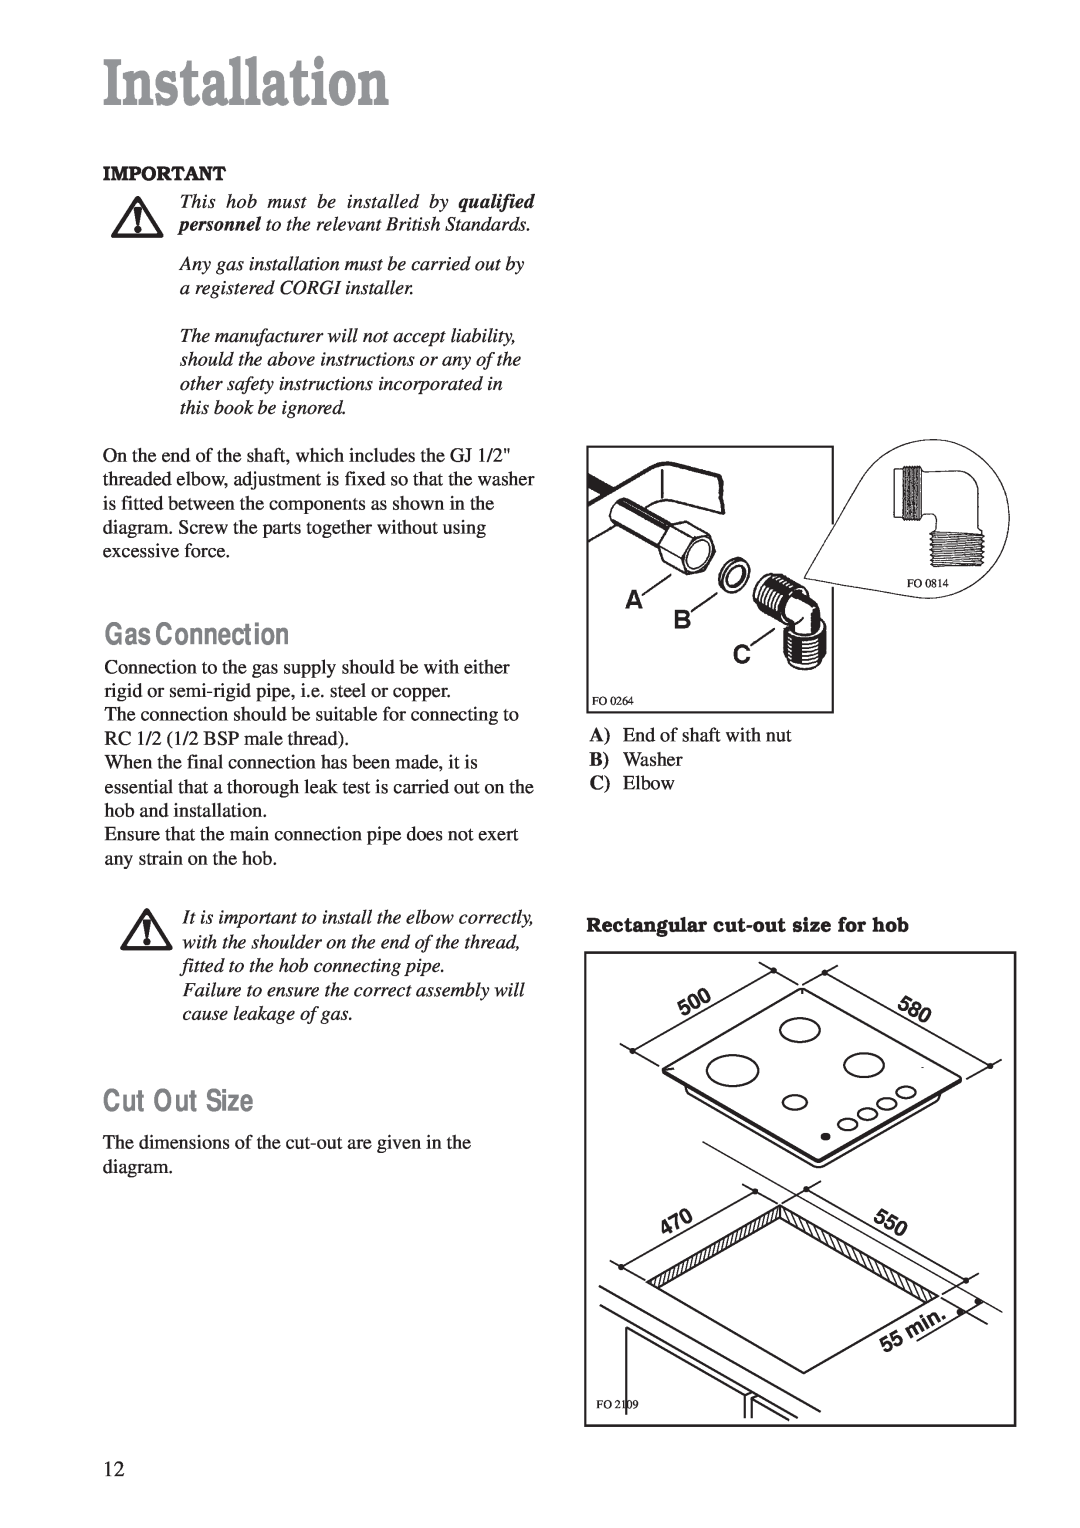 Zanussi ZAF 42 manual Installation, Gas Connection, Cut Out Size, Rectangular cut-out size for hob 